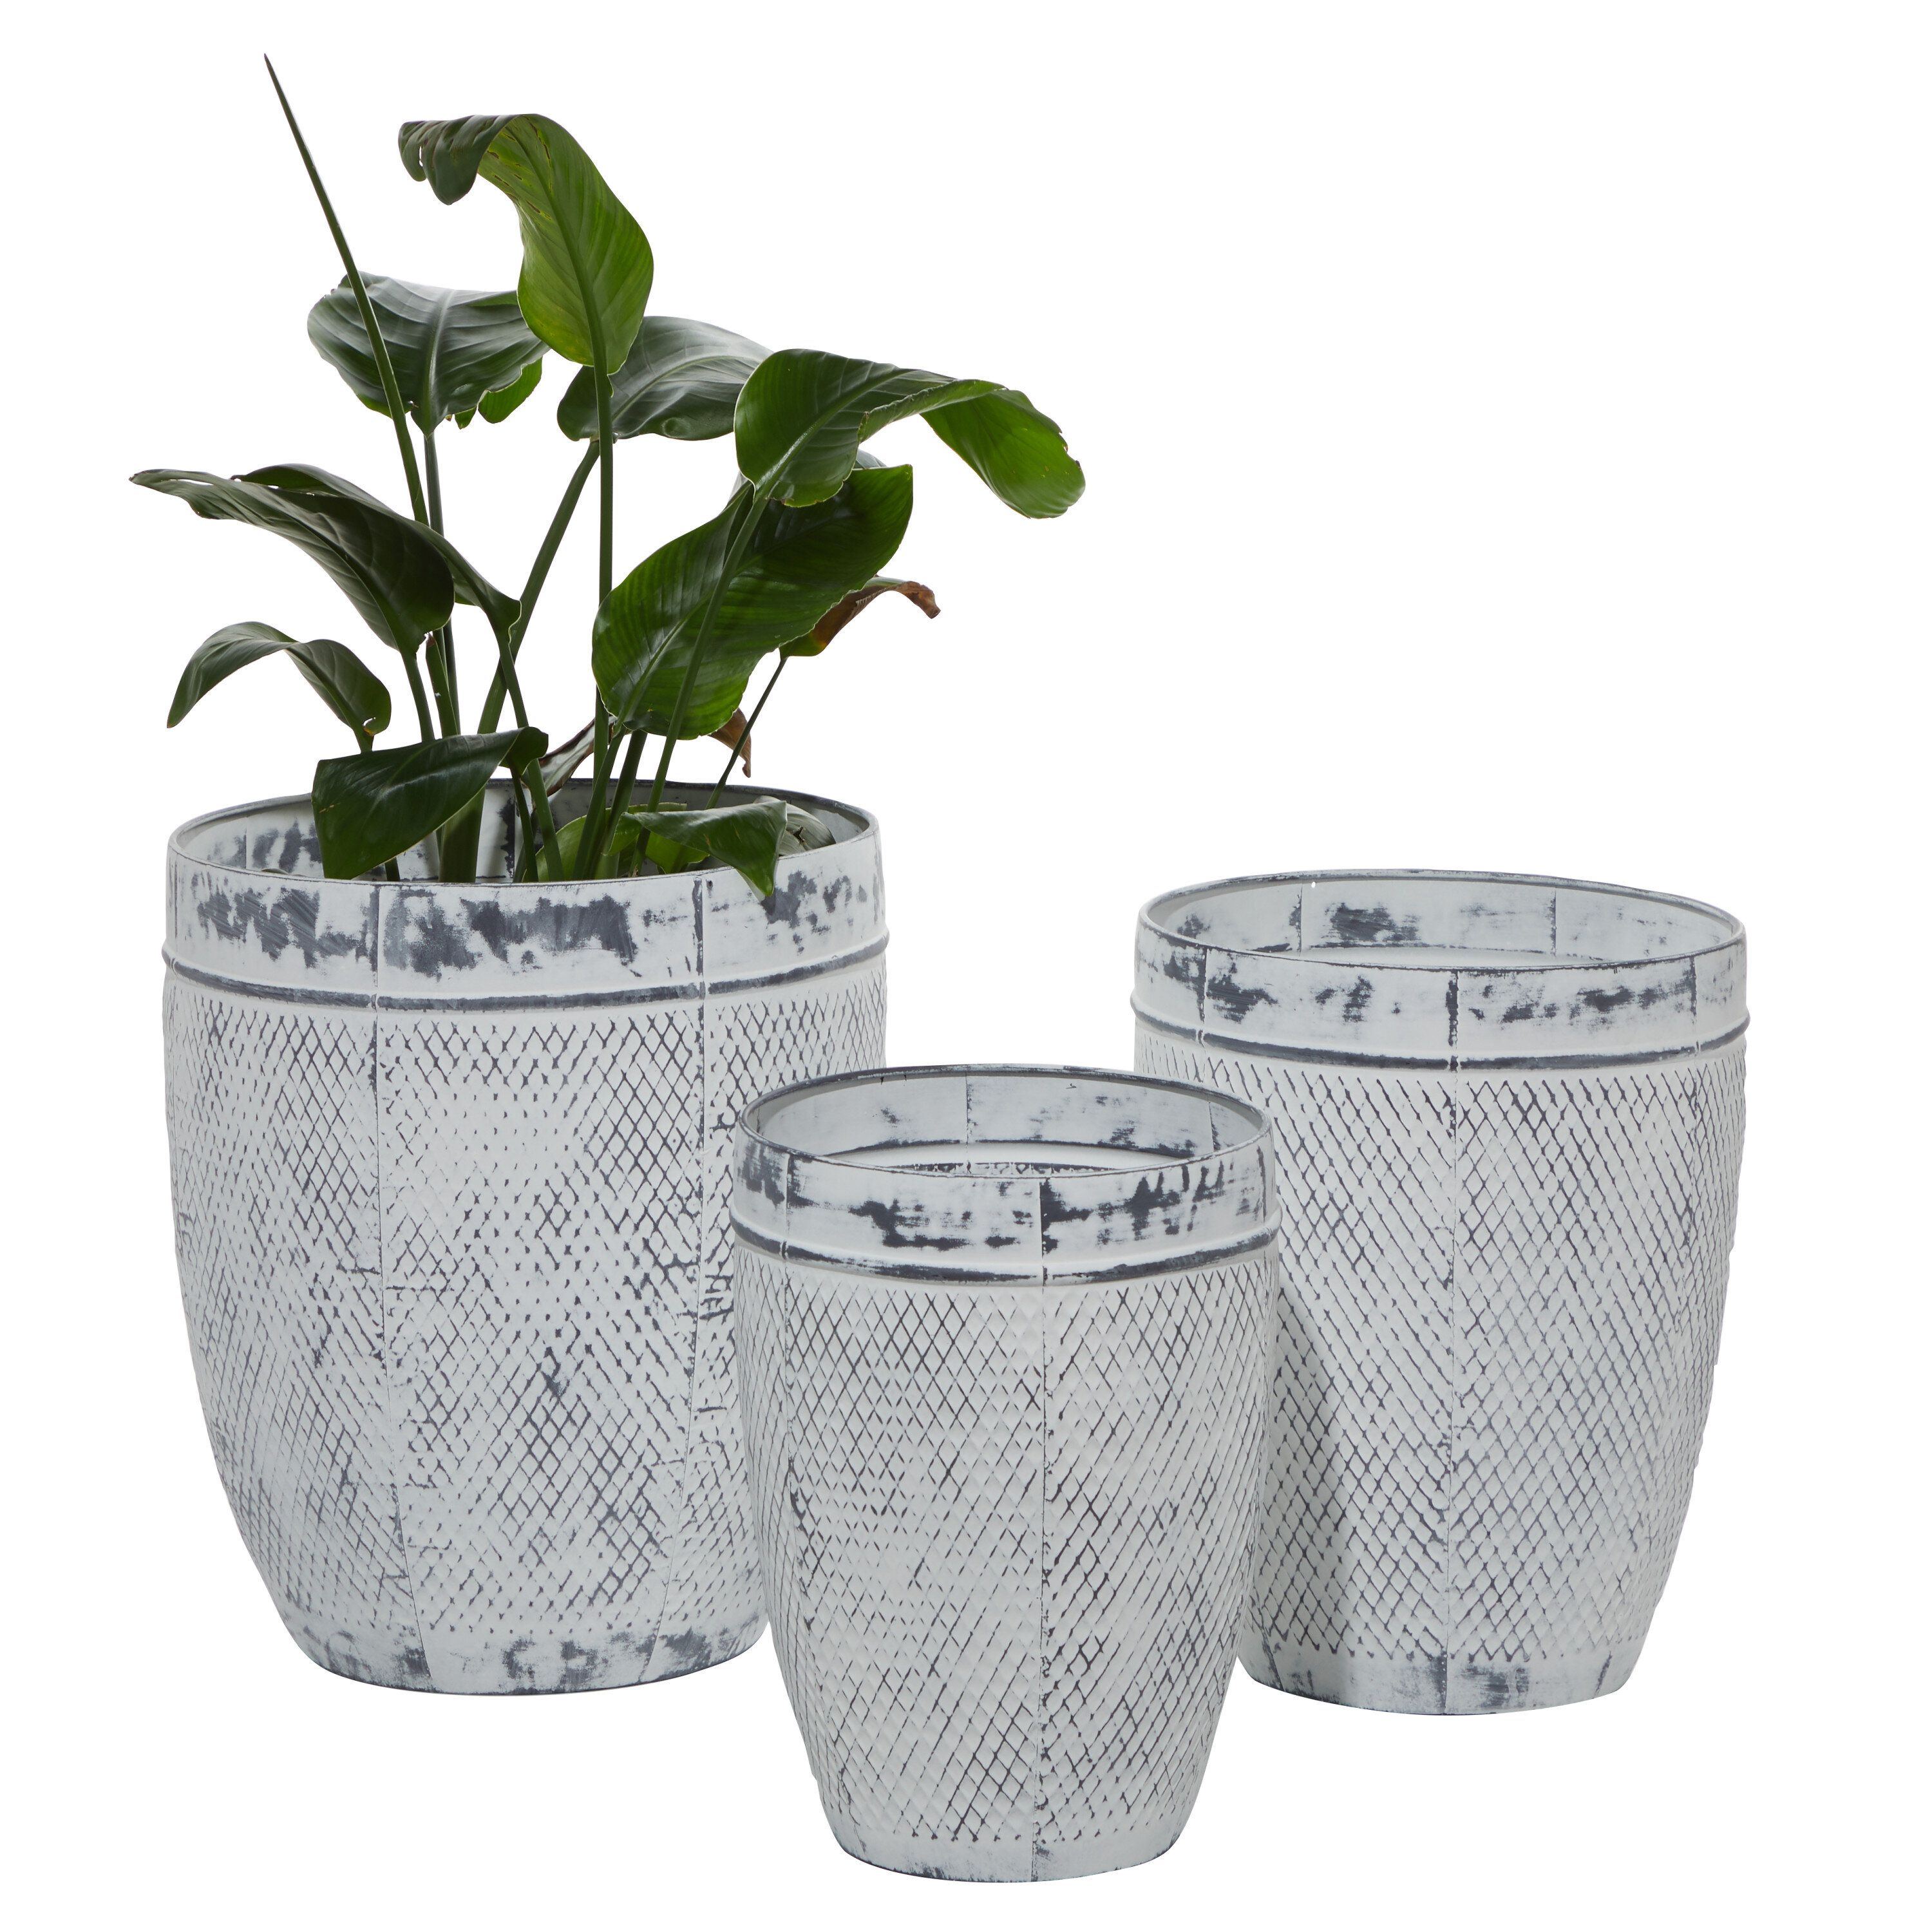 HIGOLD - 12.6 + 10.6 Inch Resin Plant Pot, Round Pot Set of 2 - On